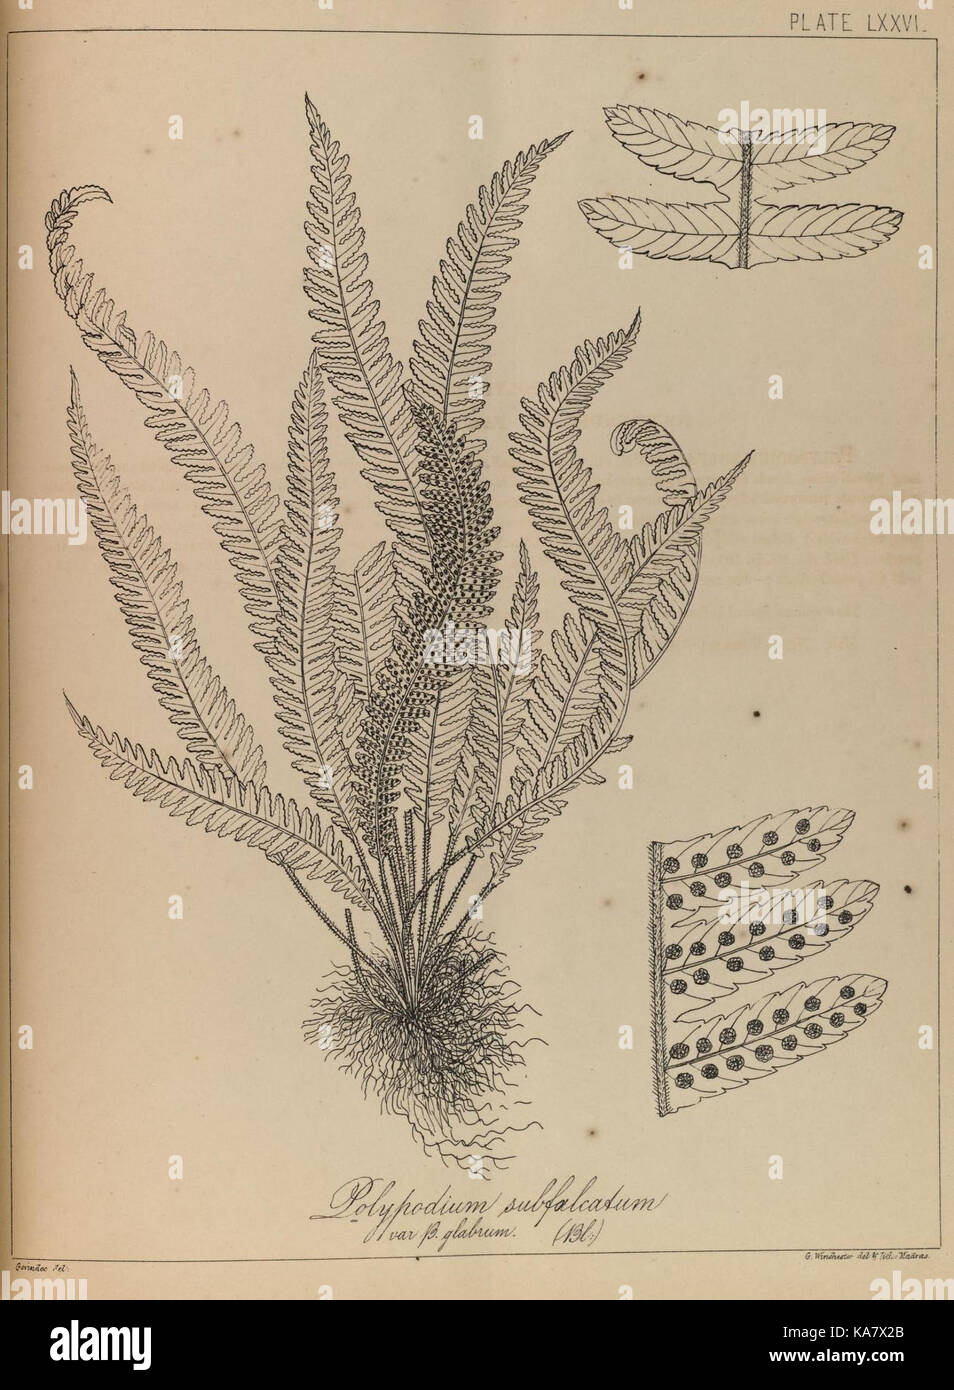 The ferns of British India (PLATE LXXVI) (8530299807) Stock Photo